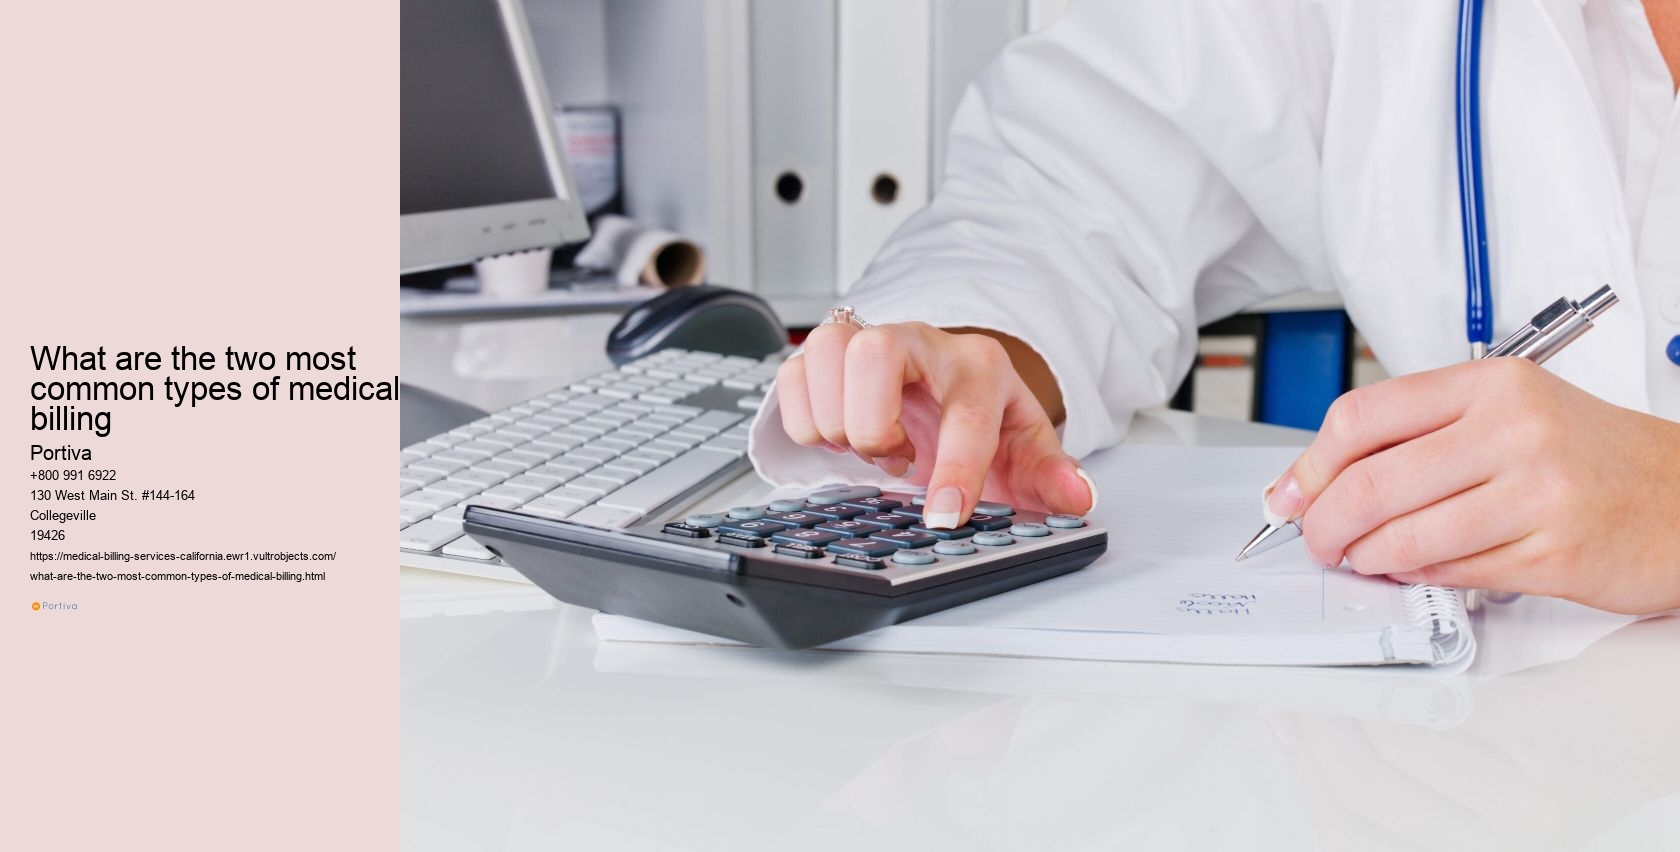 What are the two most common types of medical billing